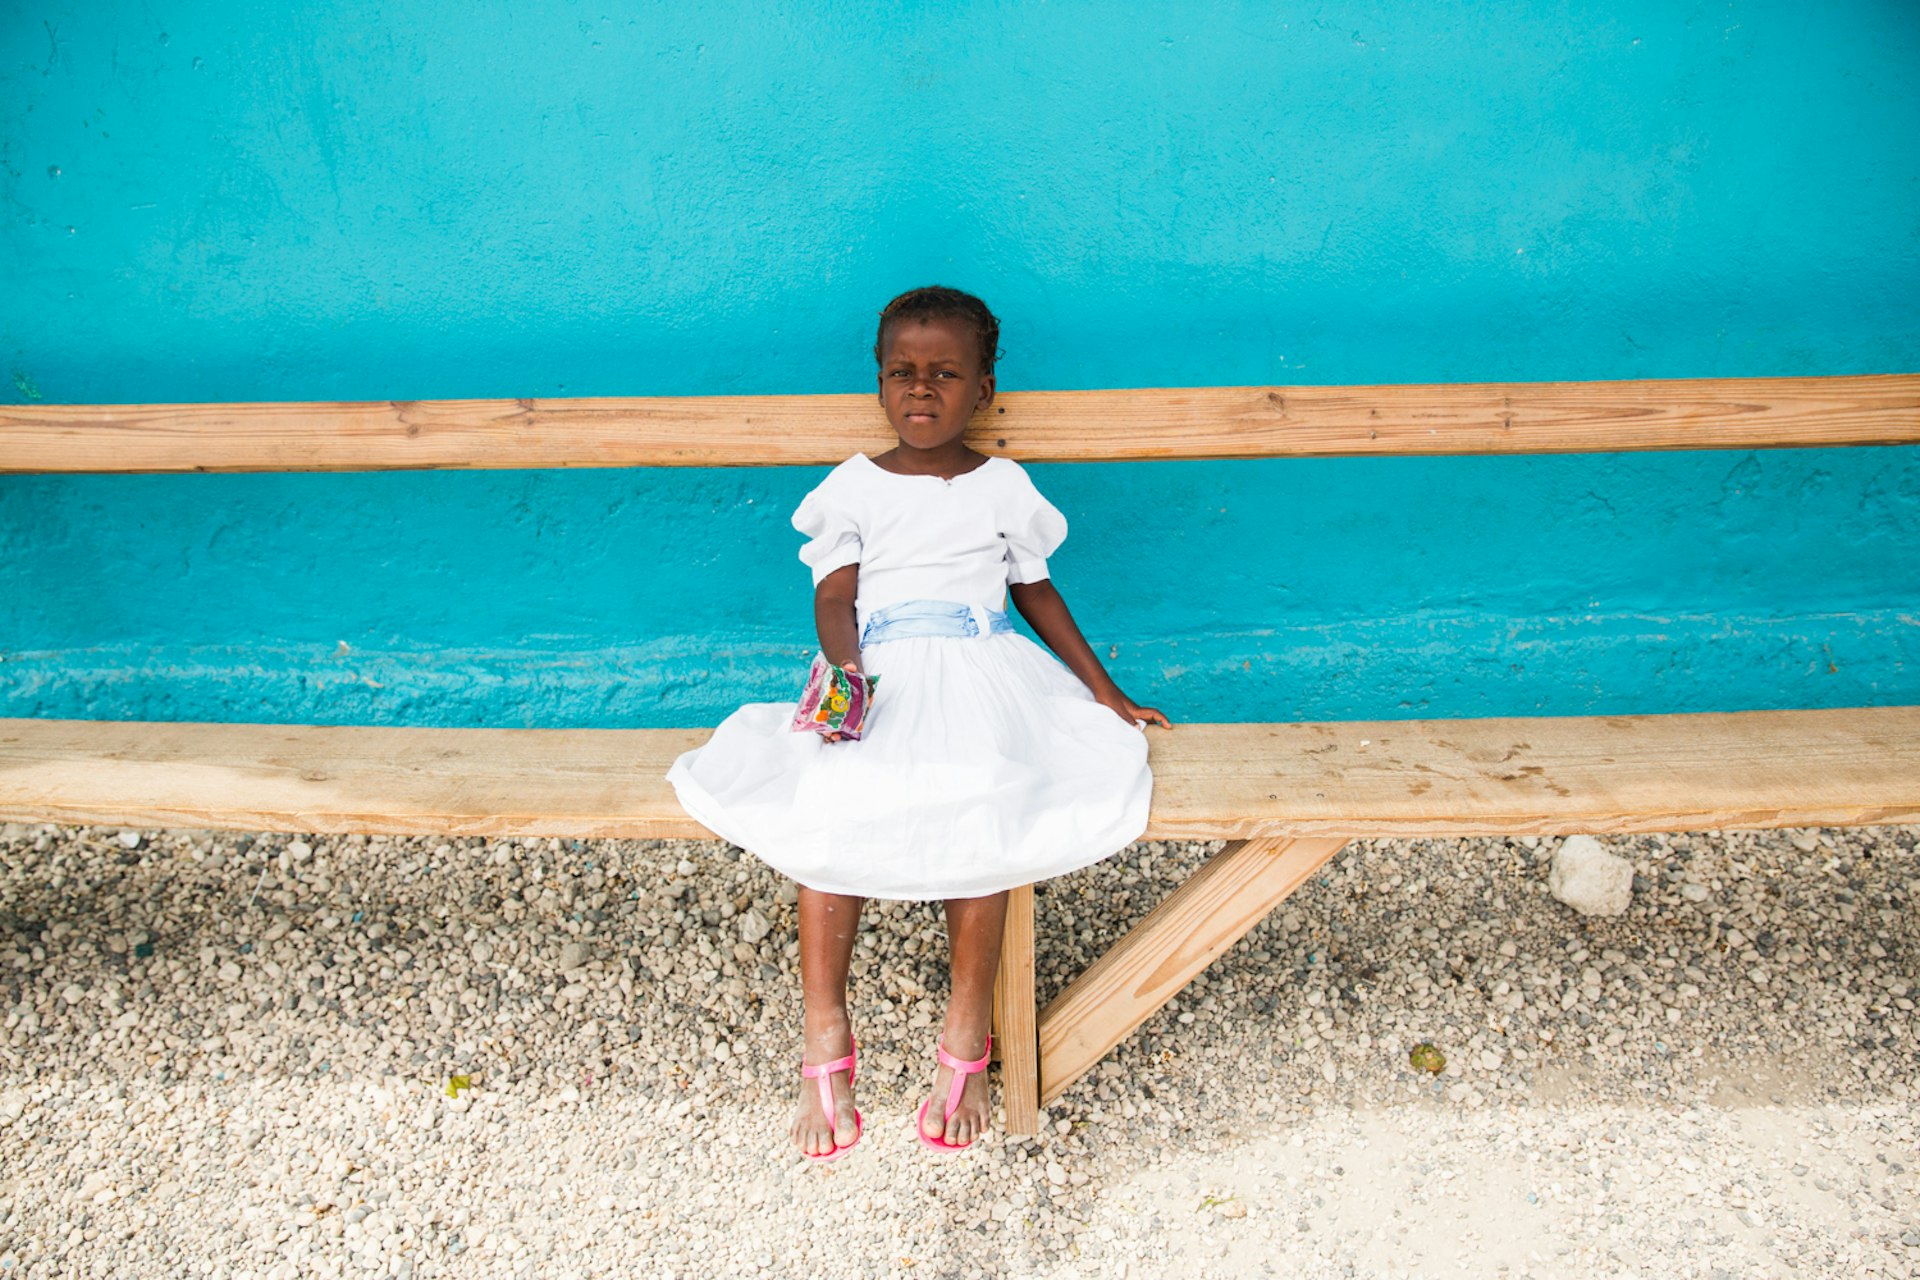 Young girl taking a break during an Easter egg hunt in Despinos, Haiti. She lives in an orphanage in Despinos, Haiti that is run by “Imagine Missions”, which houses, feeds, educates over 100 children.